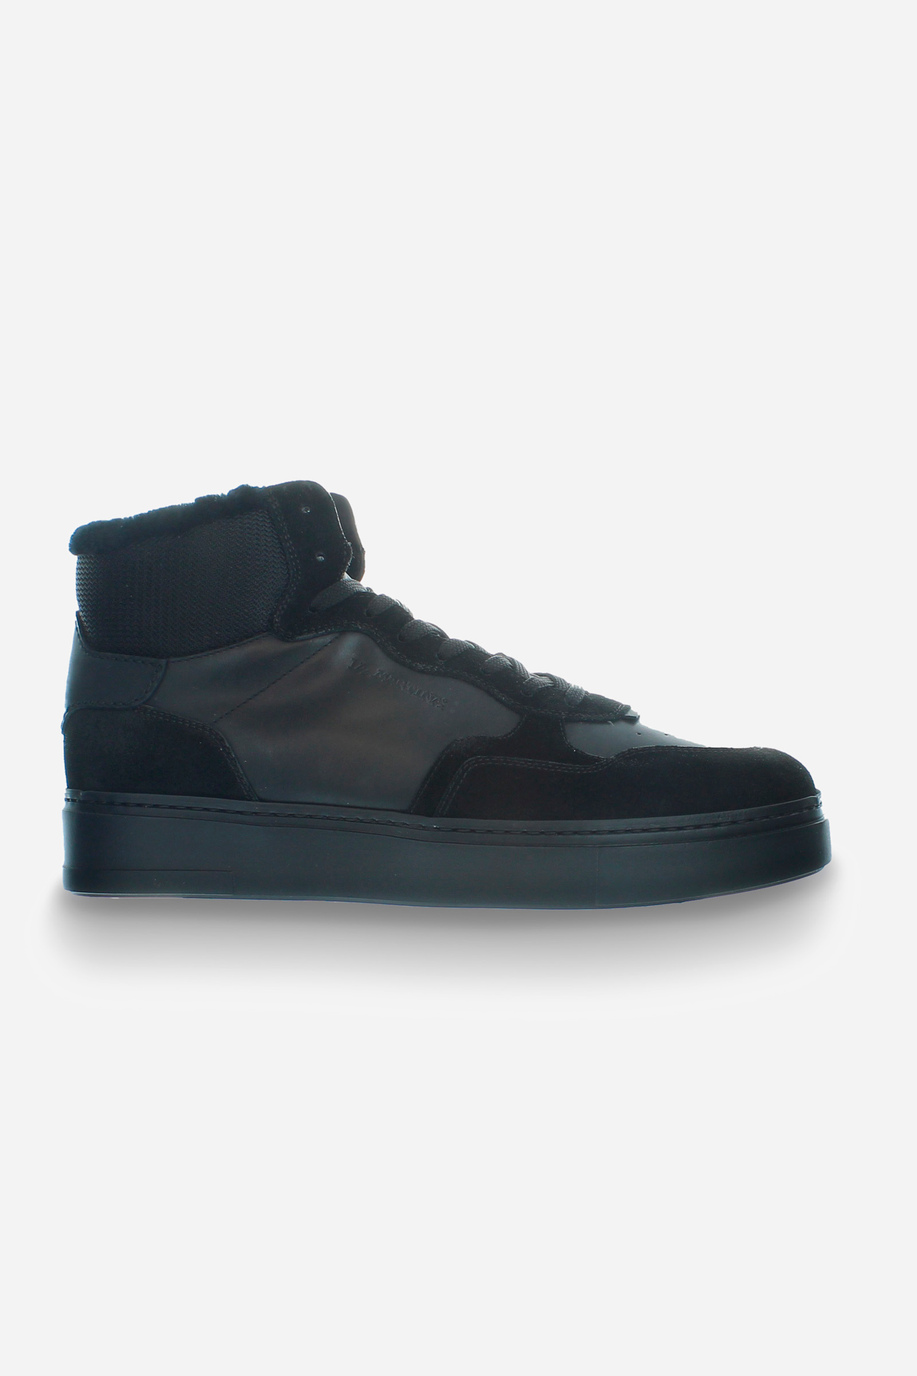 Men leather sneakers mixed suede with sheepskin lining - Sneakers | La Martina - Official Online Shop